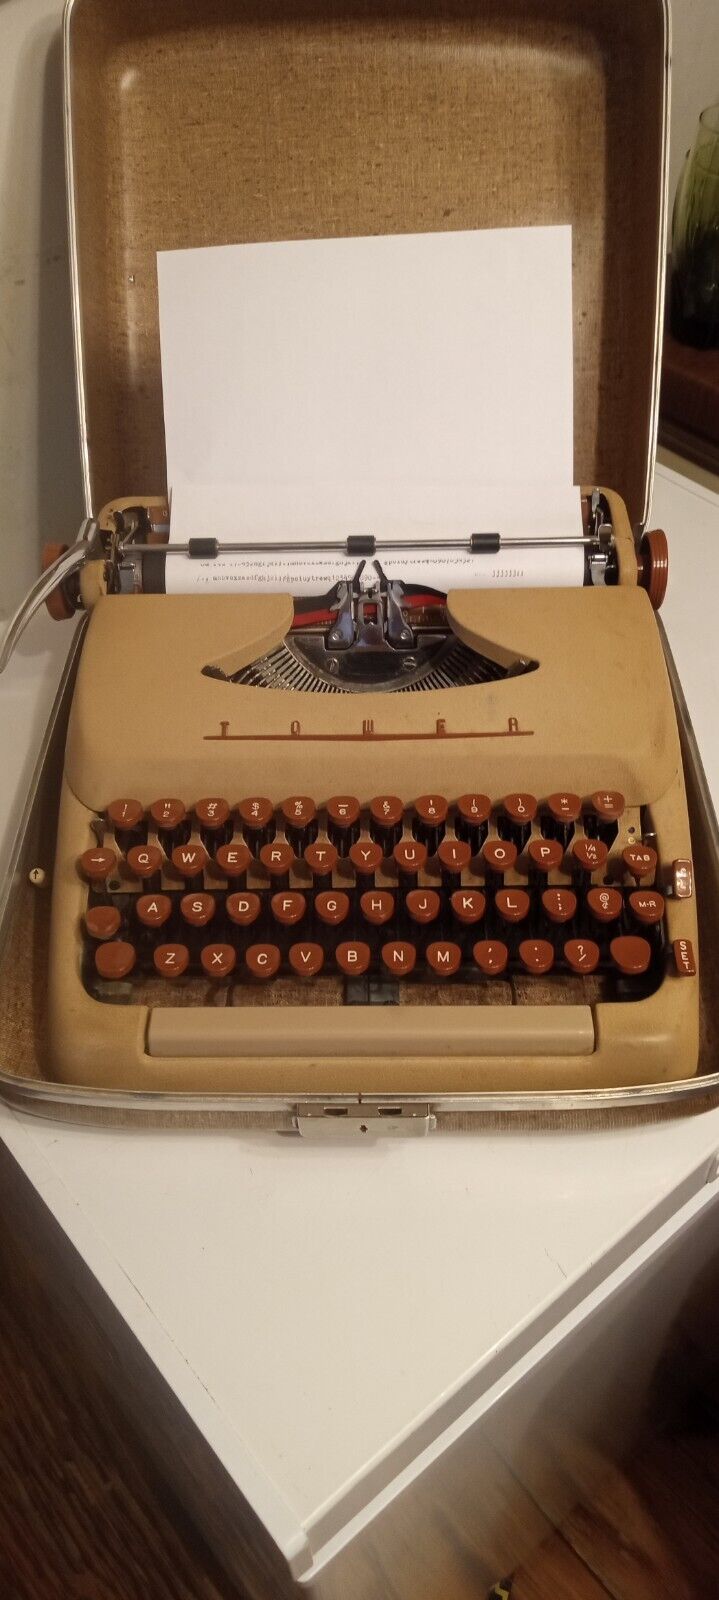 1958 Tower President (Smith-Corona Silent-Super) typewriter, working perfectly.